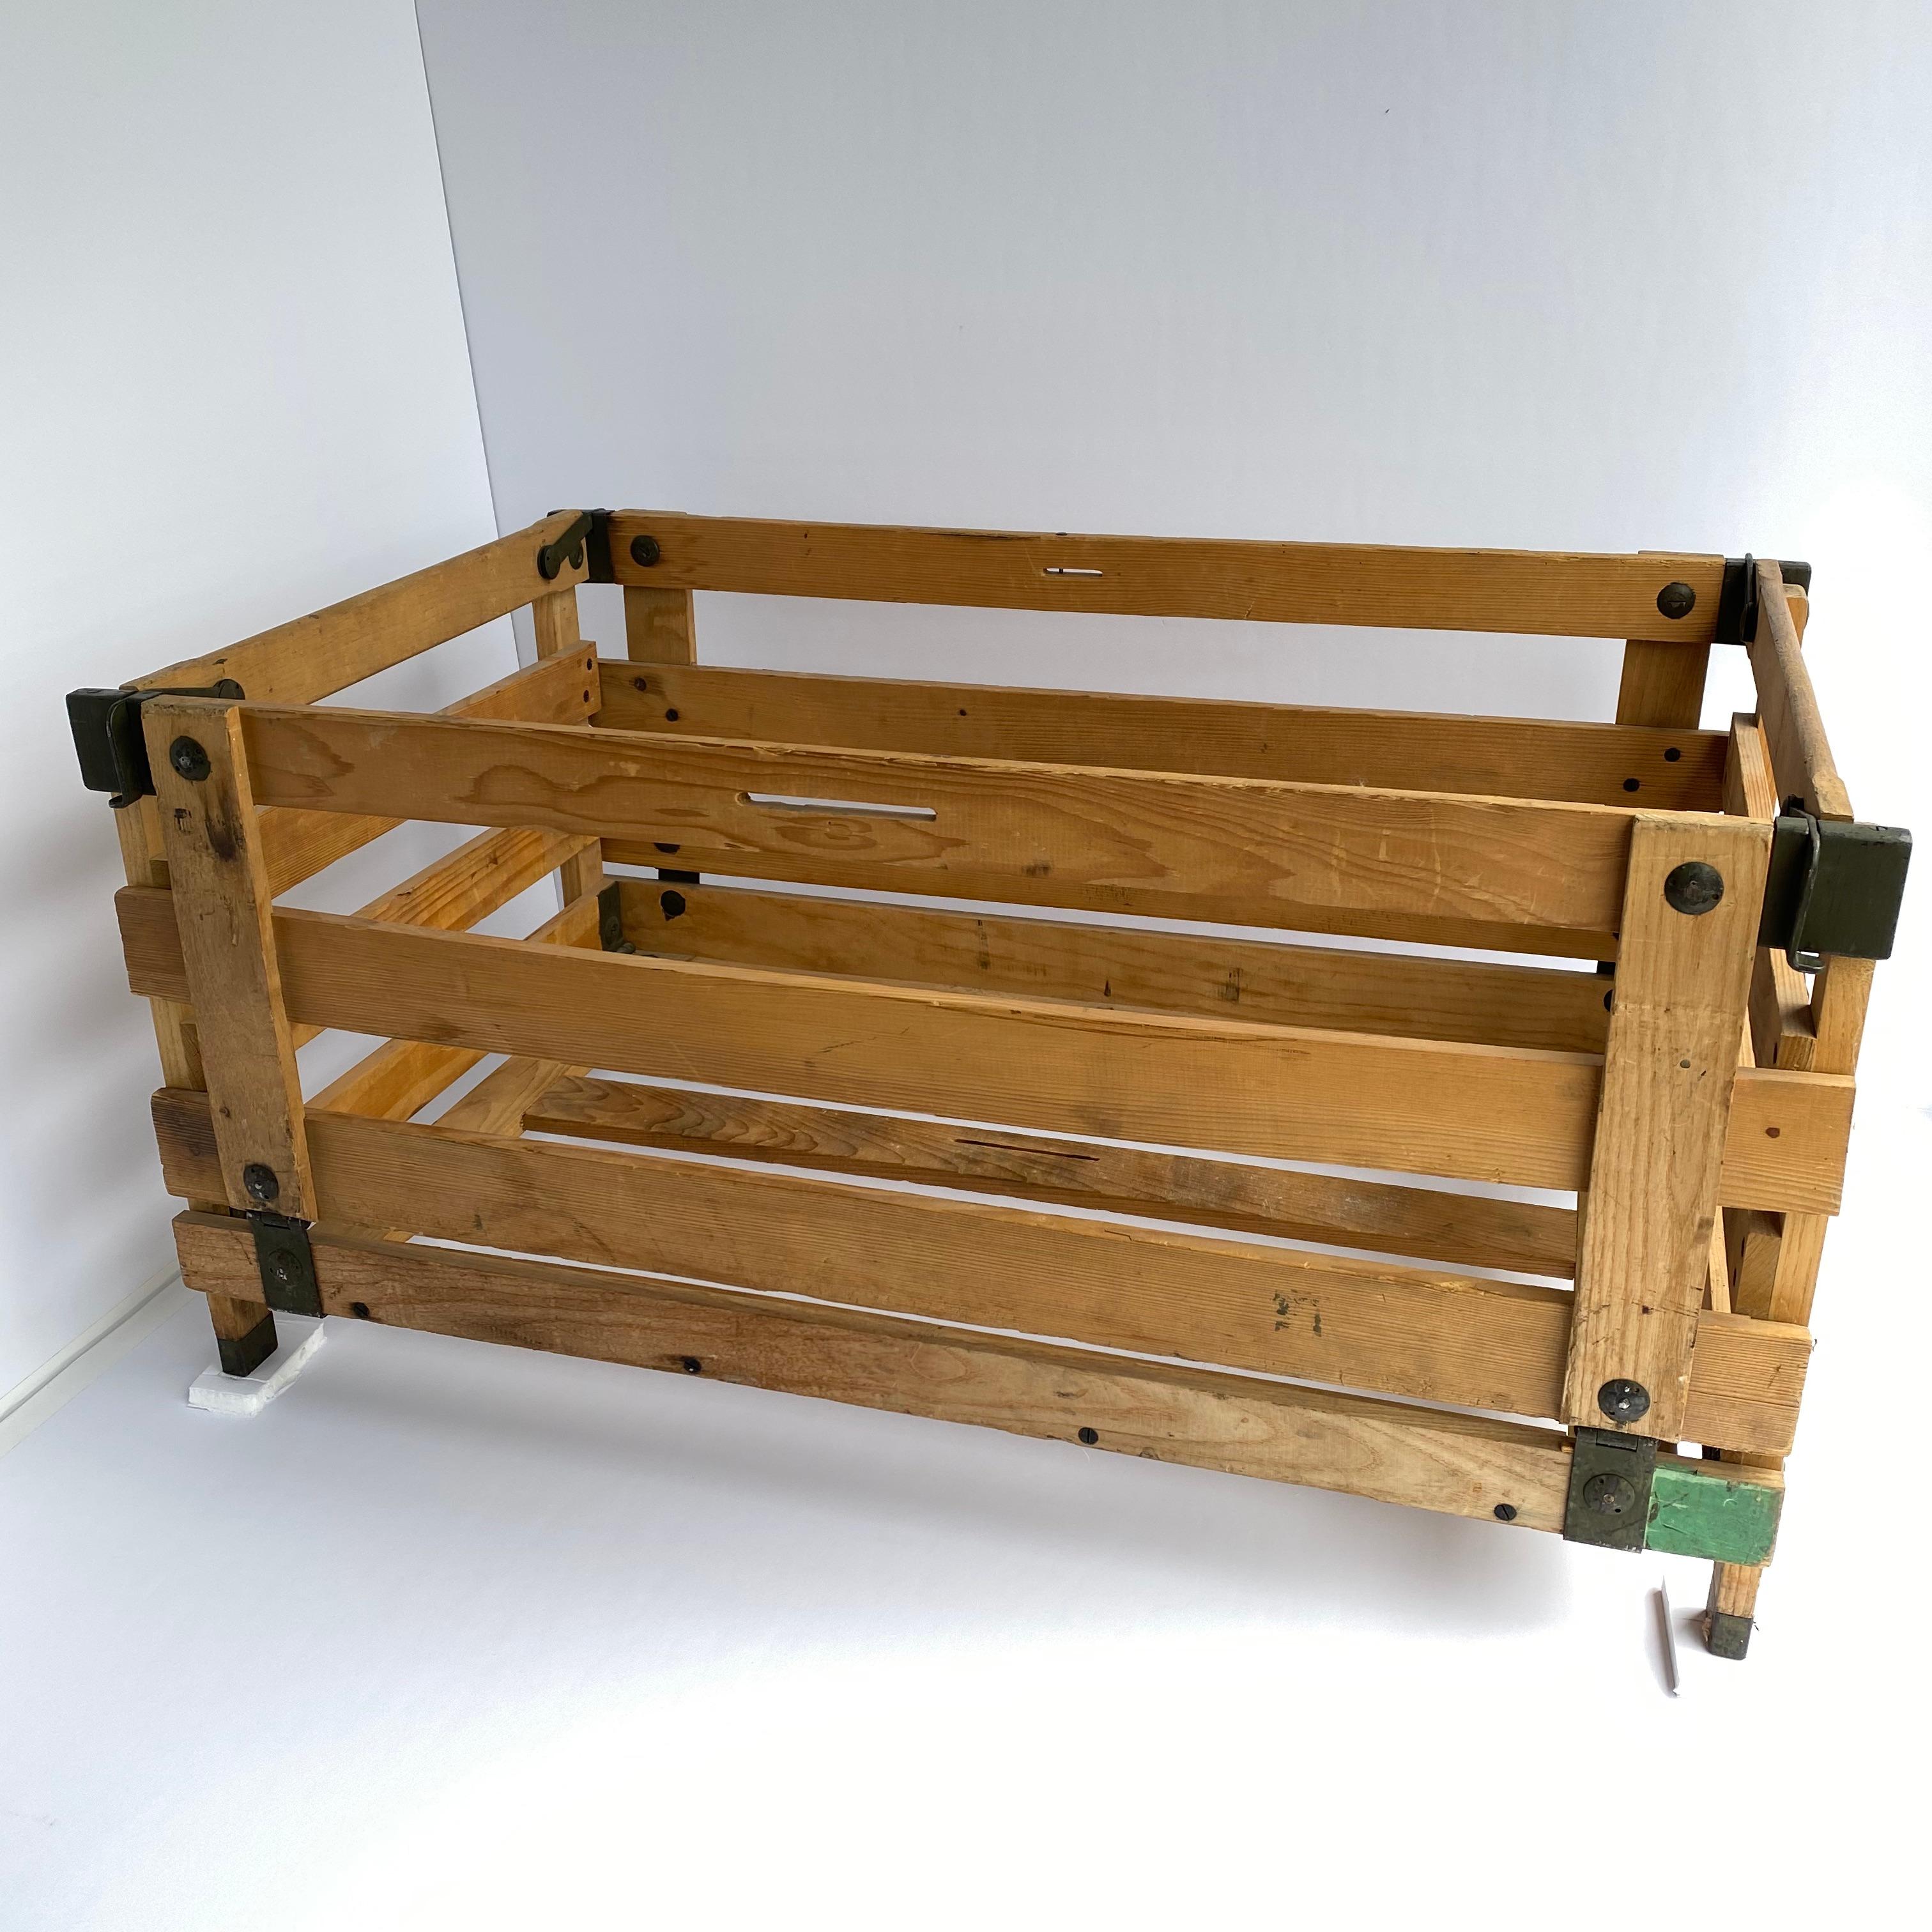 Wood Collection of Rustic American Vintage Collapsible Crates